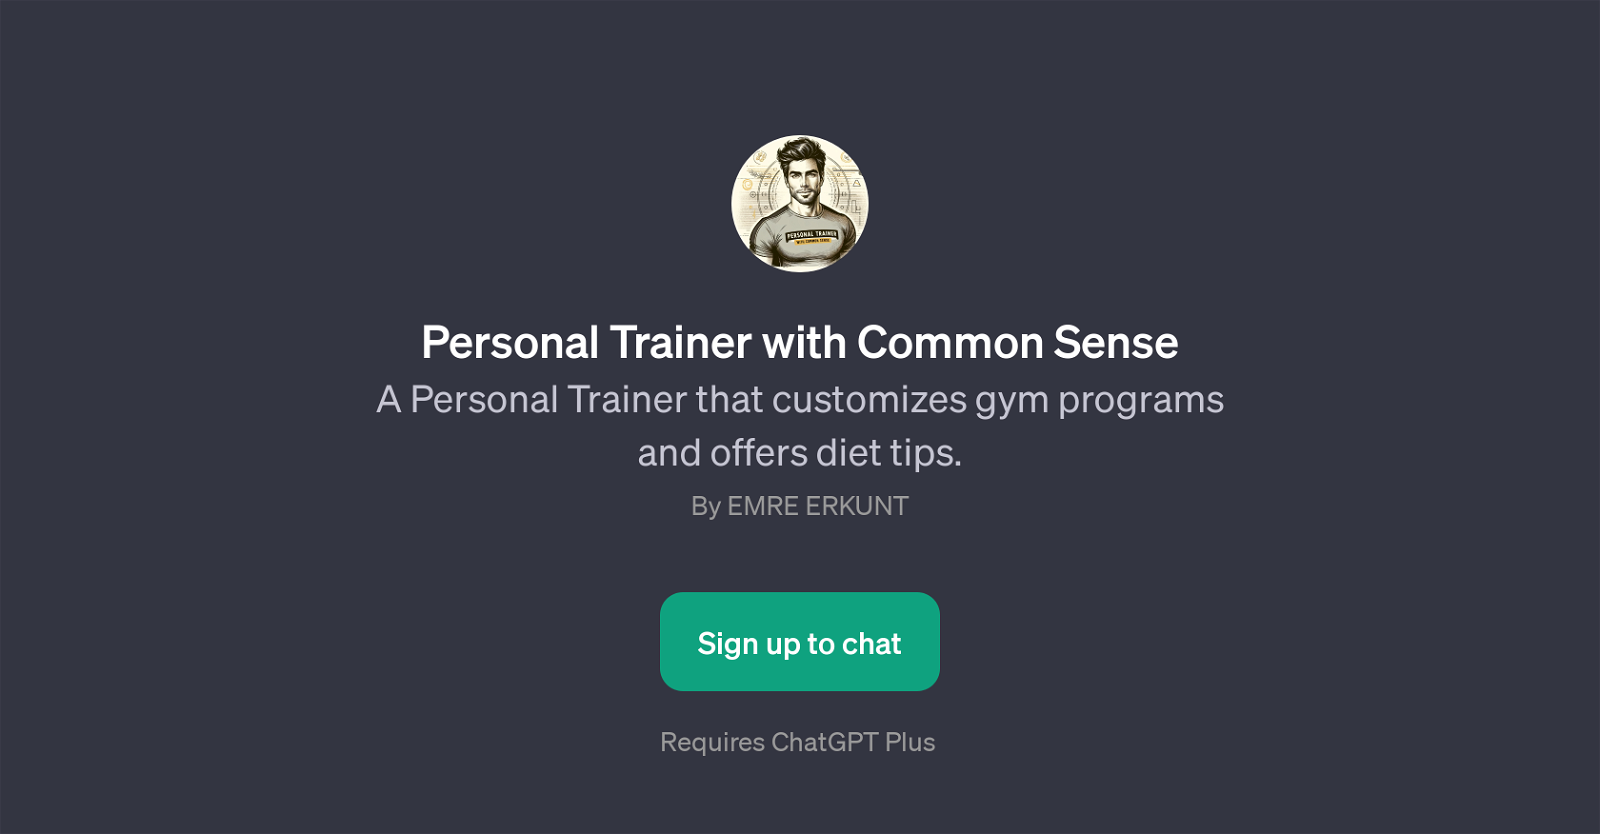 Personal Trainer with Common Sense website